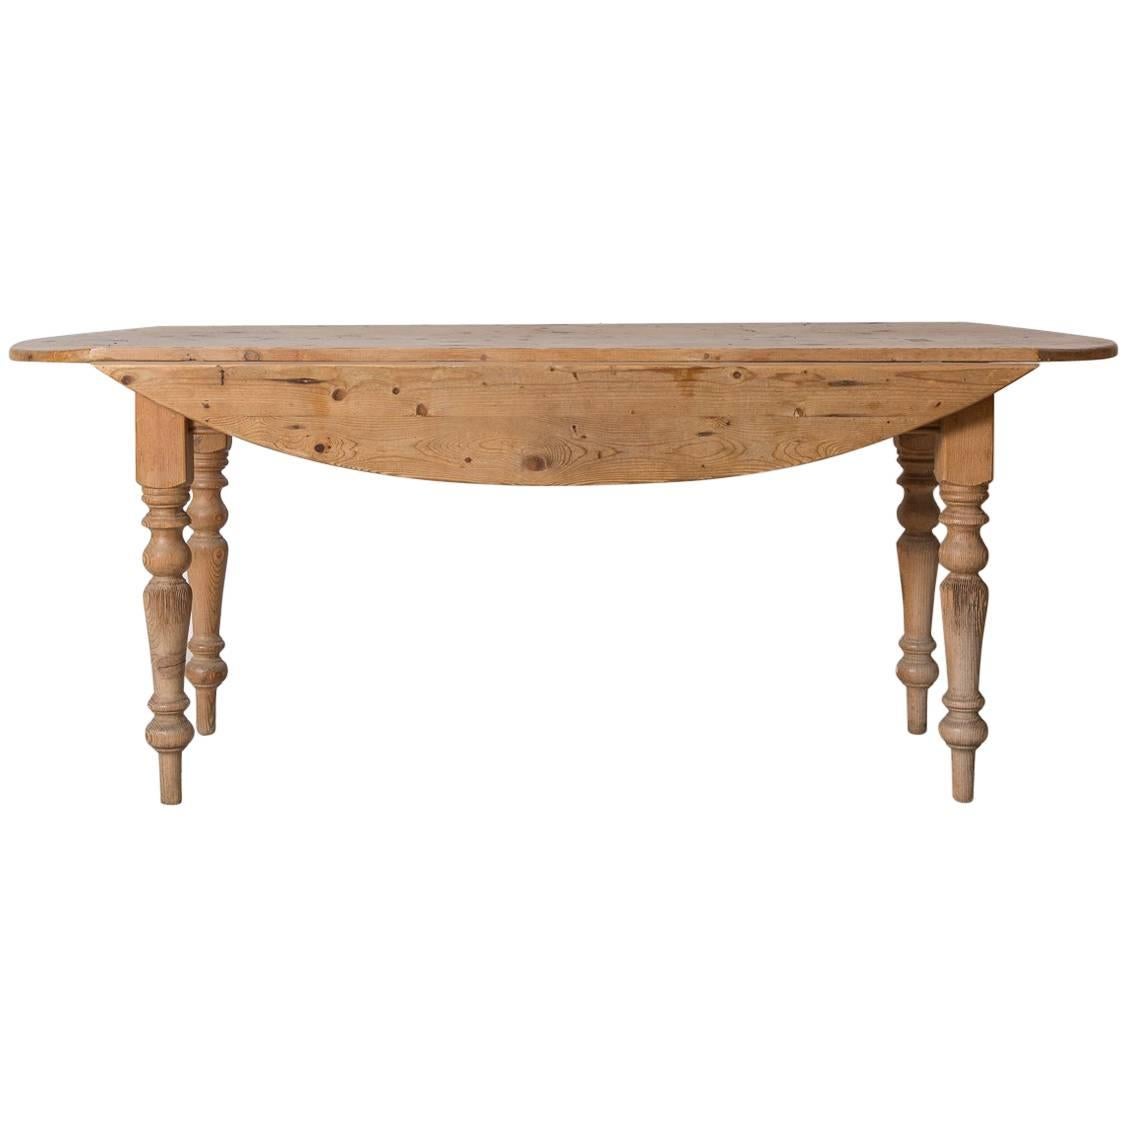 French Pine Drop-Leaf Table with Spindle Legs